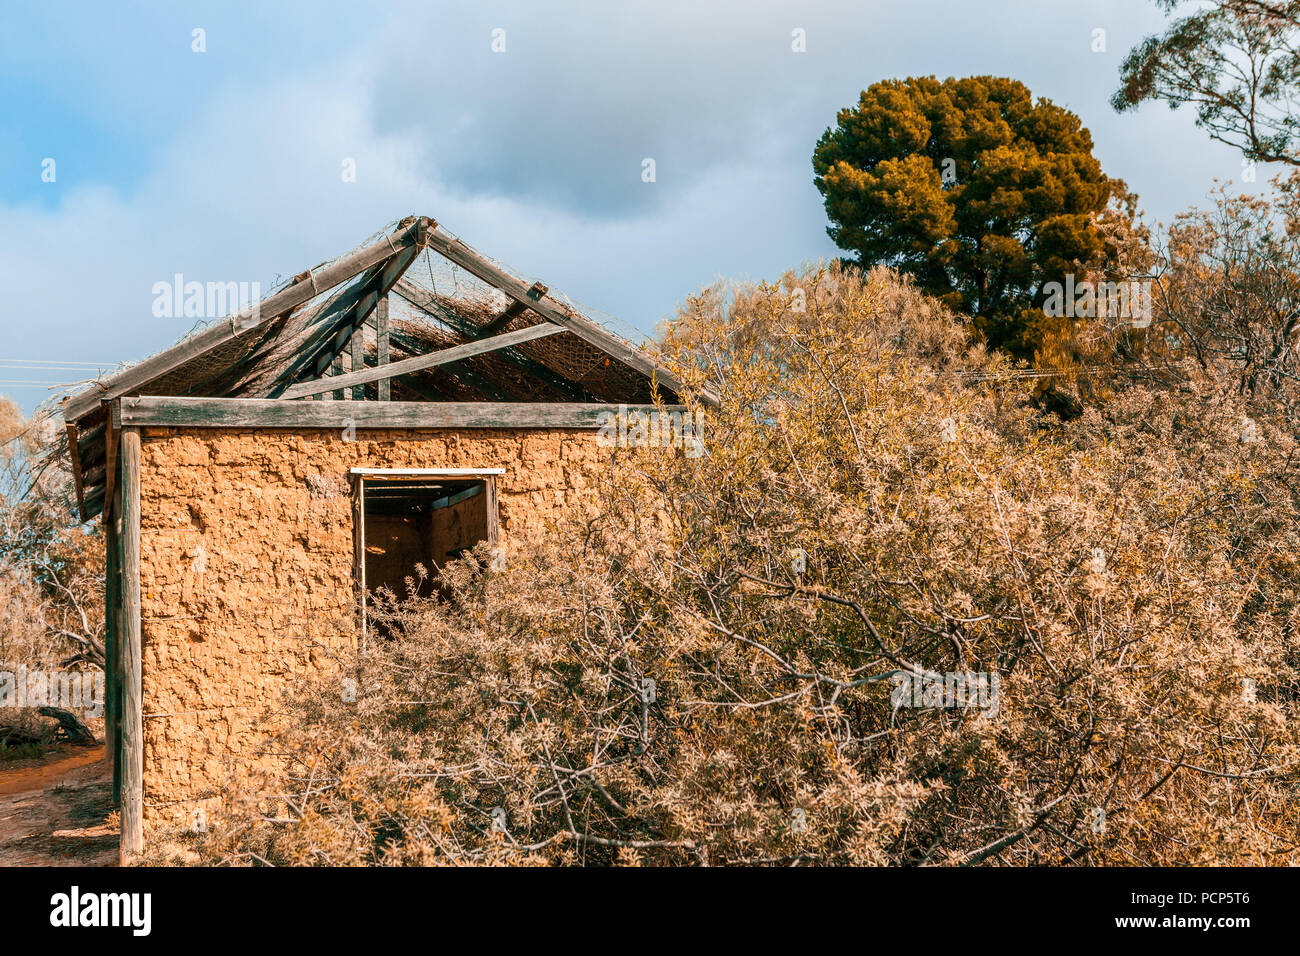 Small tribal mud hut in Australian outback Stock Photo